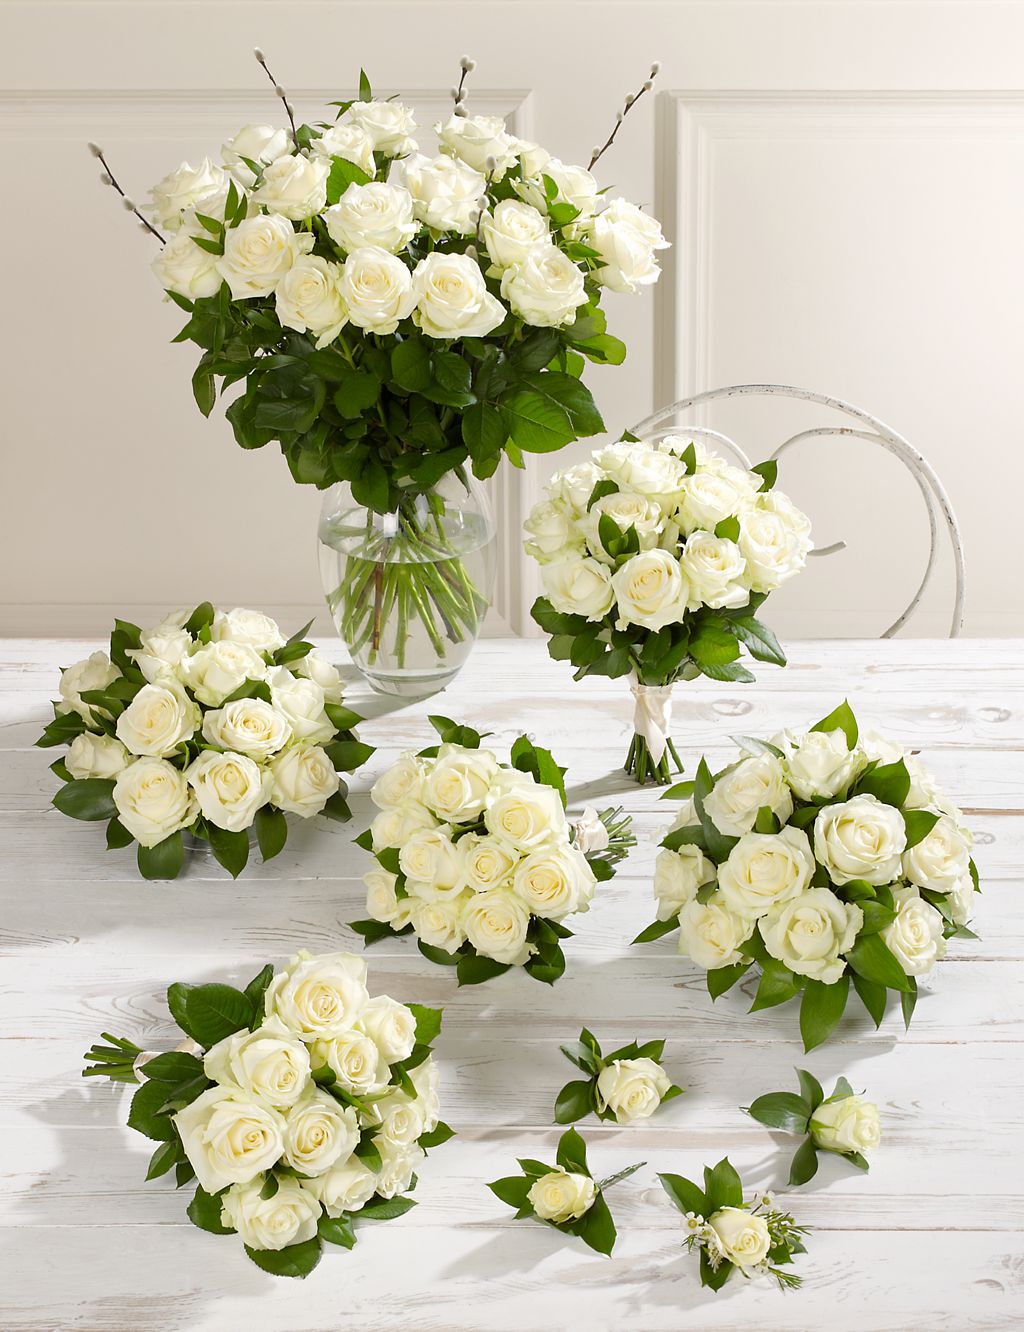 Creamy-white Luxury Rose Wedding Flowers - Collection 4 1 of 1